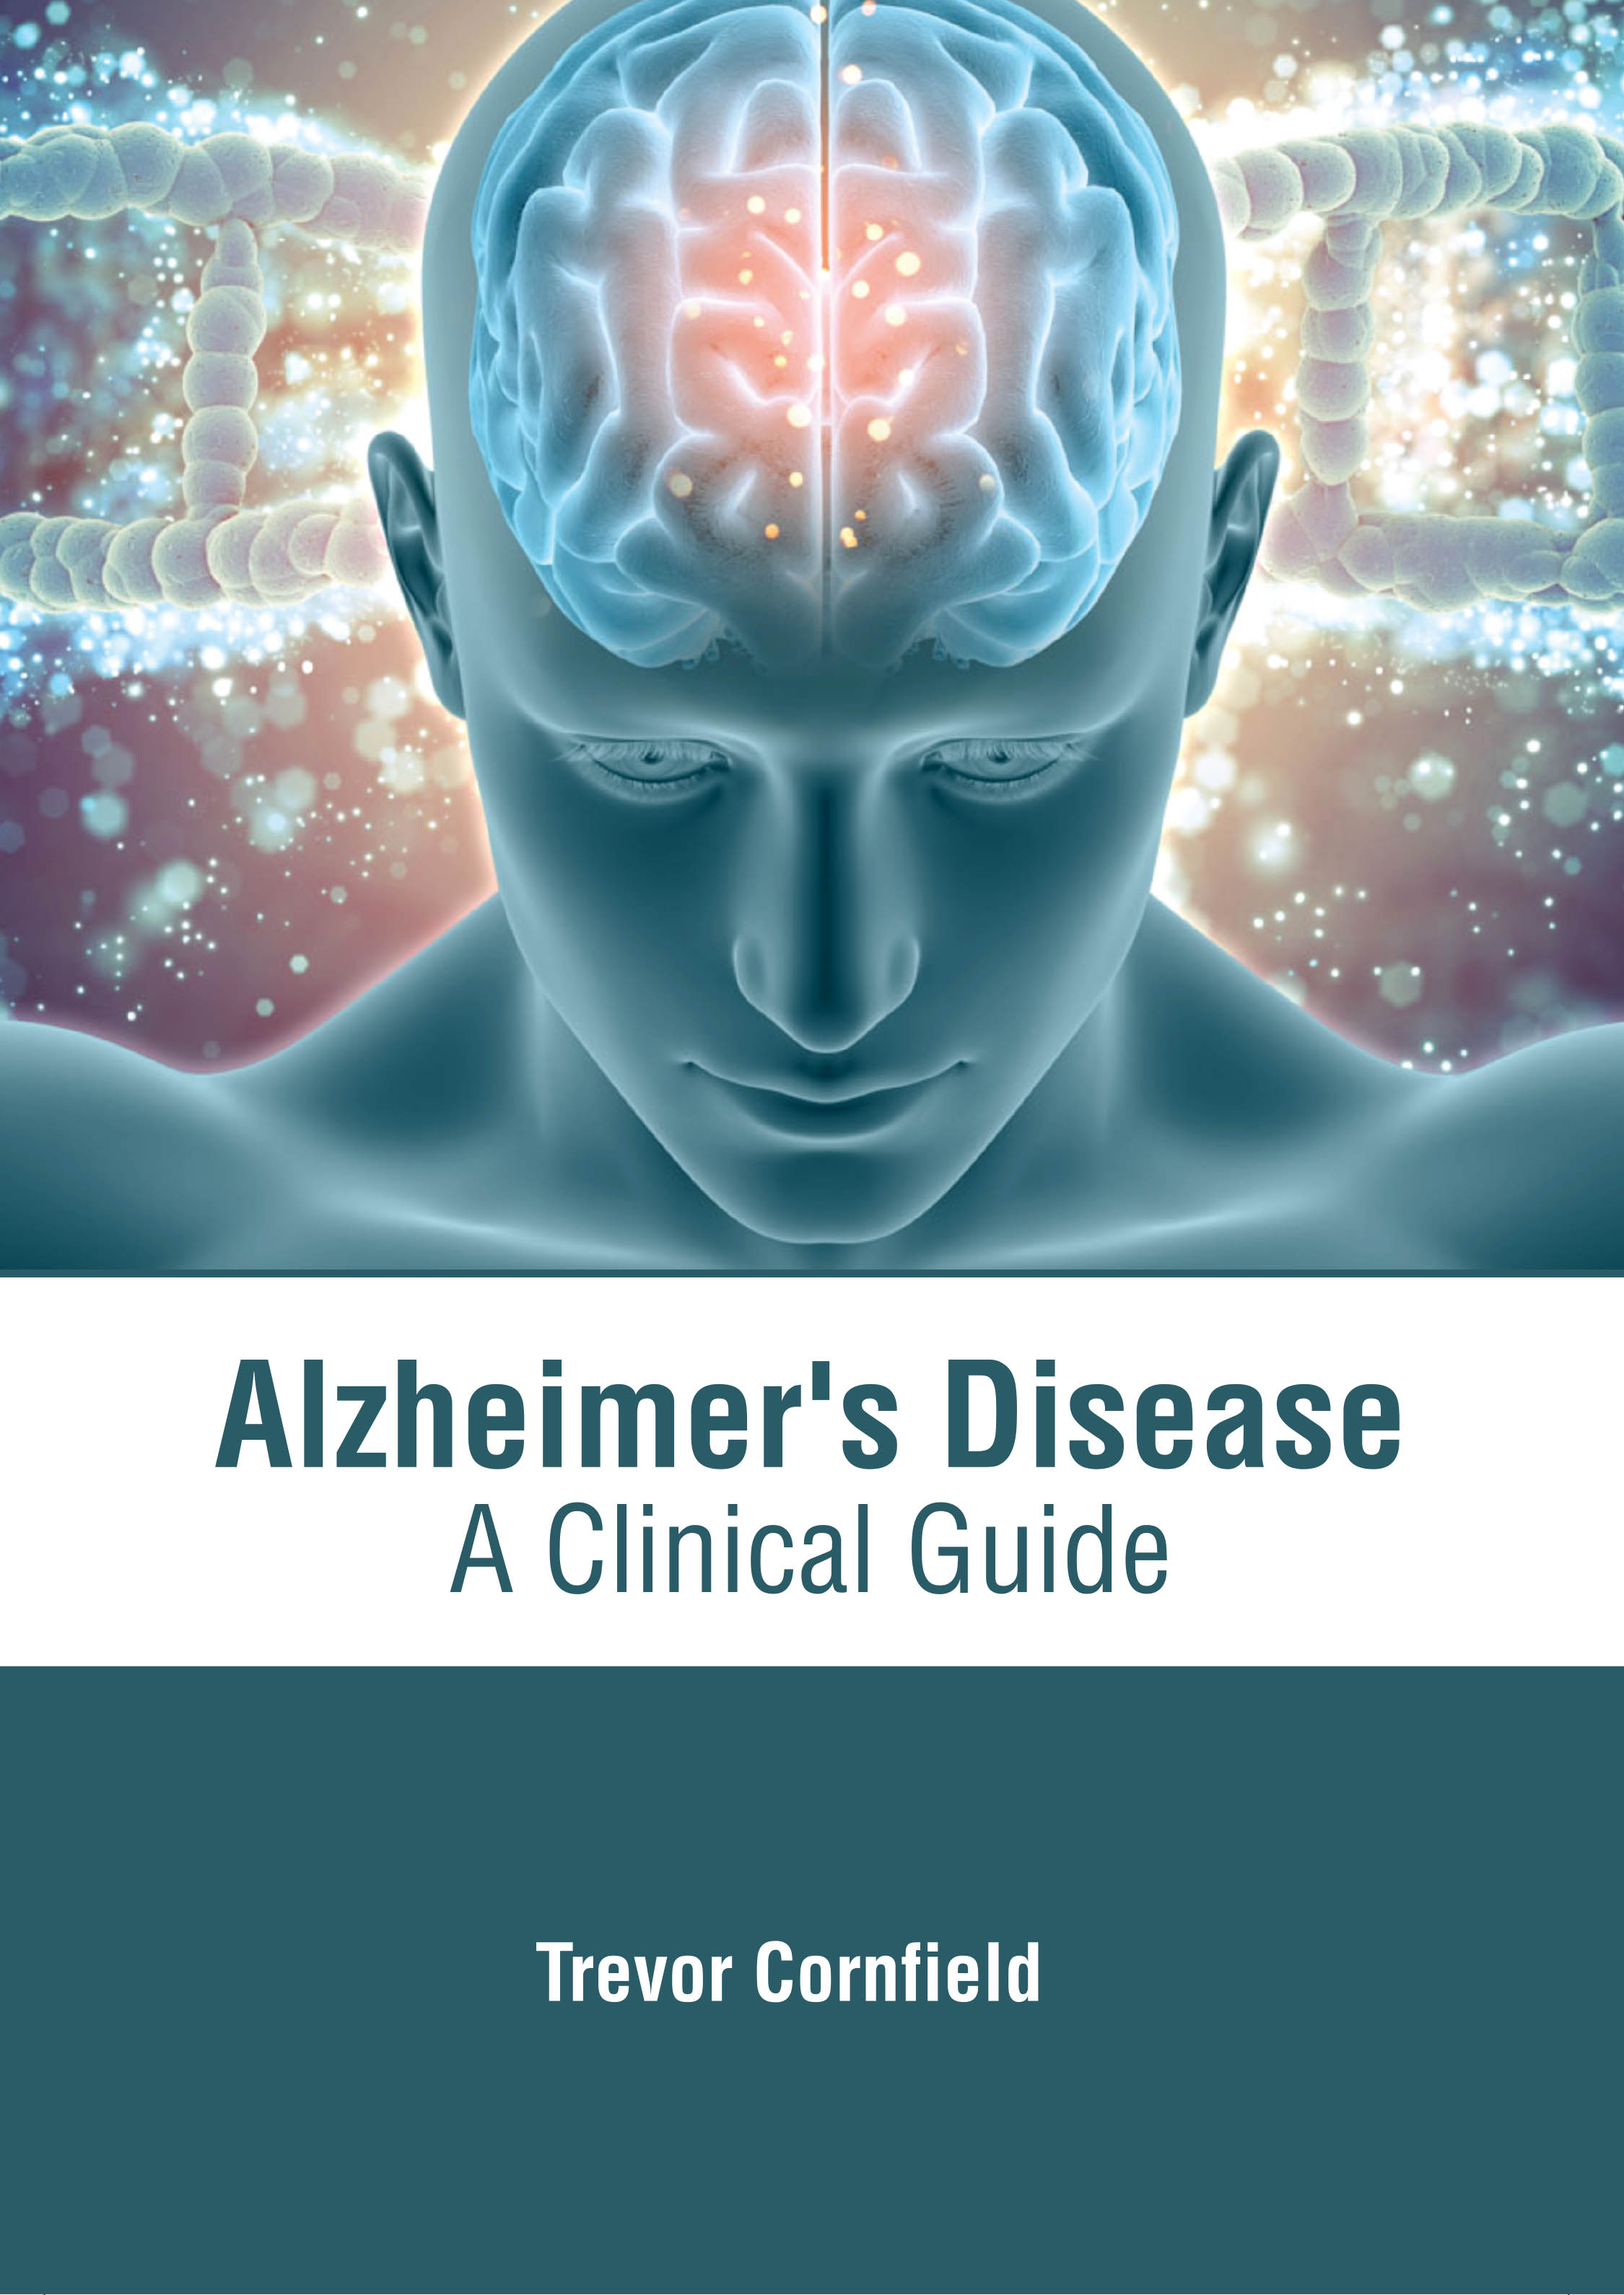 

medical-reference-books/psychiatry/alzheimer-s-disease-a-clinical-guide-9781639274352